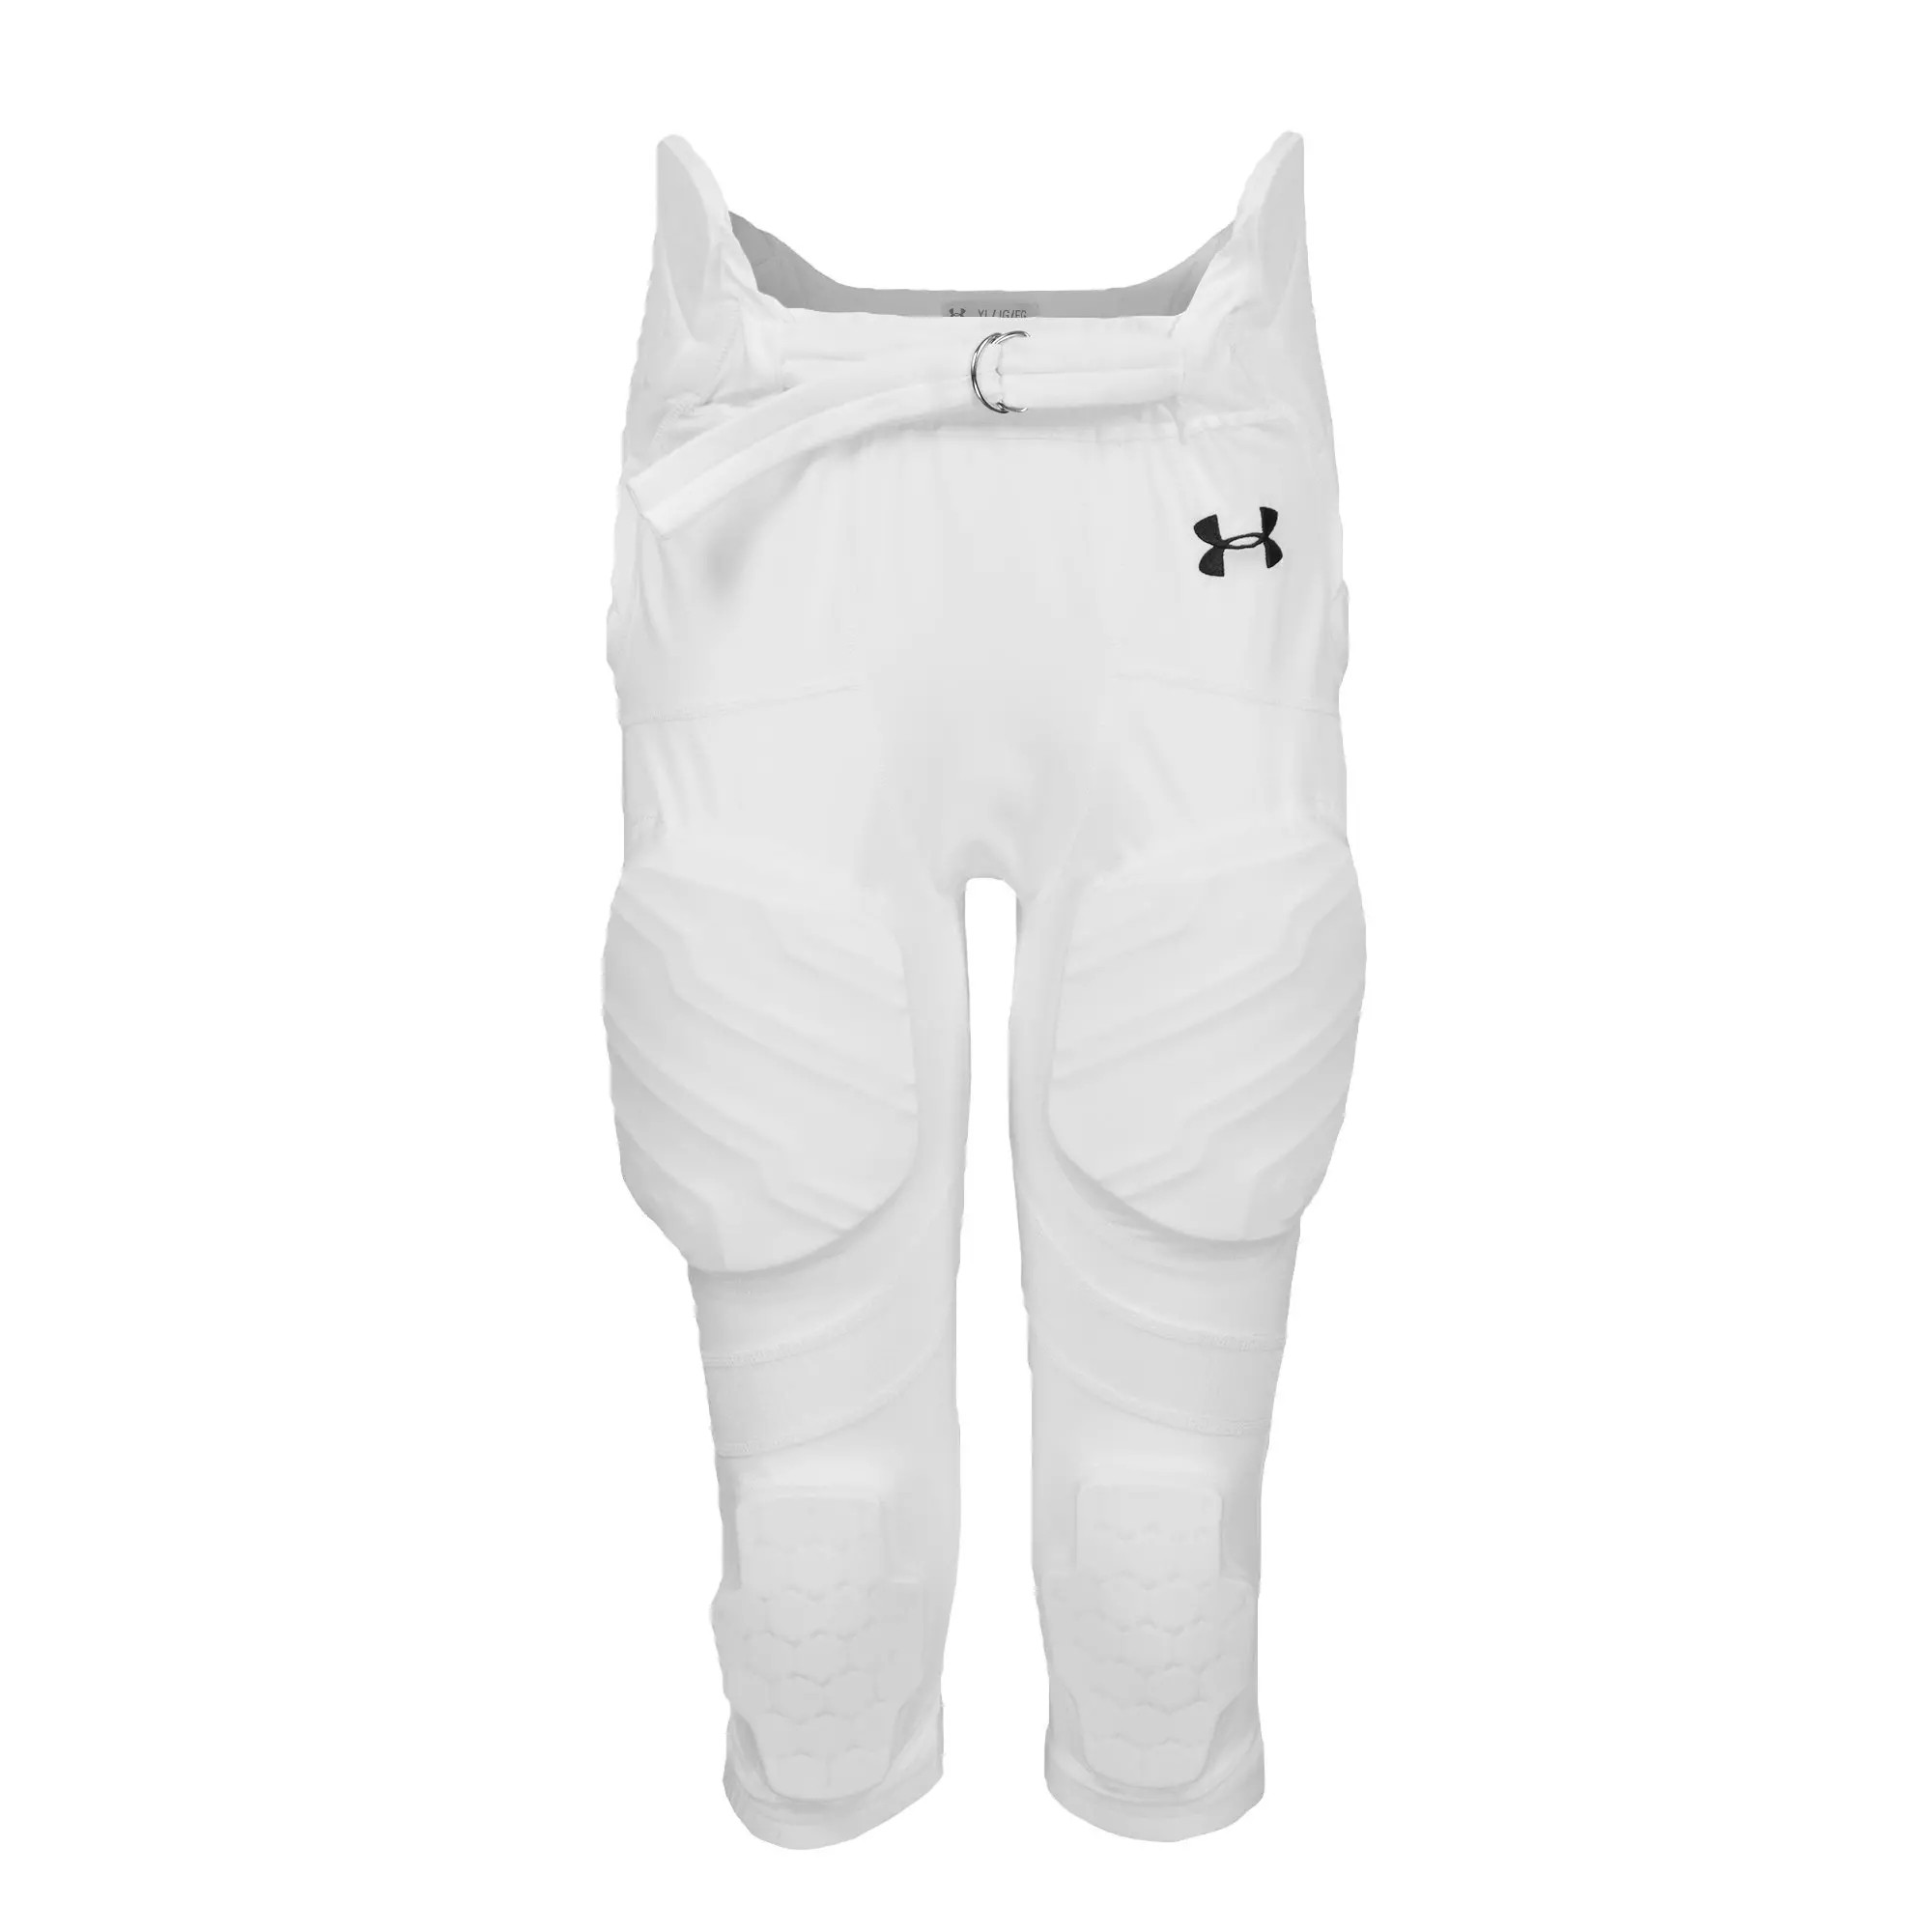 https://classic.cdn.media.amplience.net/i/hibbett/0Y666_1000_main1/Under%20Armour%20Youth%20Integrated%20Football%20Pant%20-%20White-1000?$small$&fmt=webp